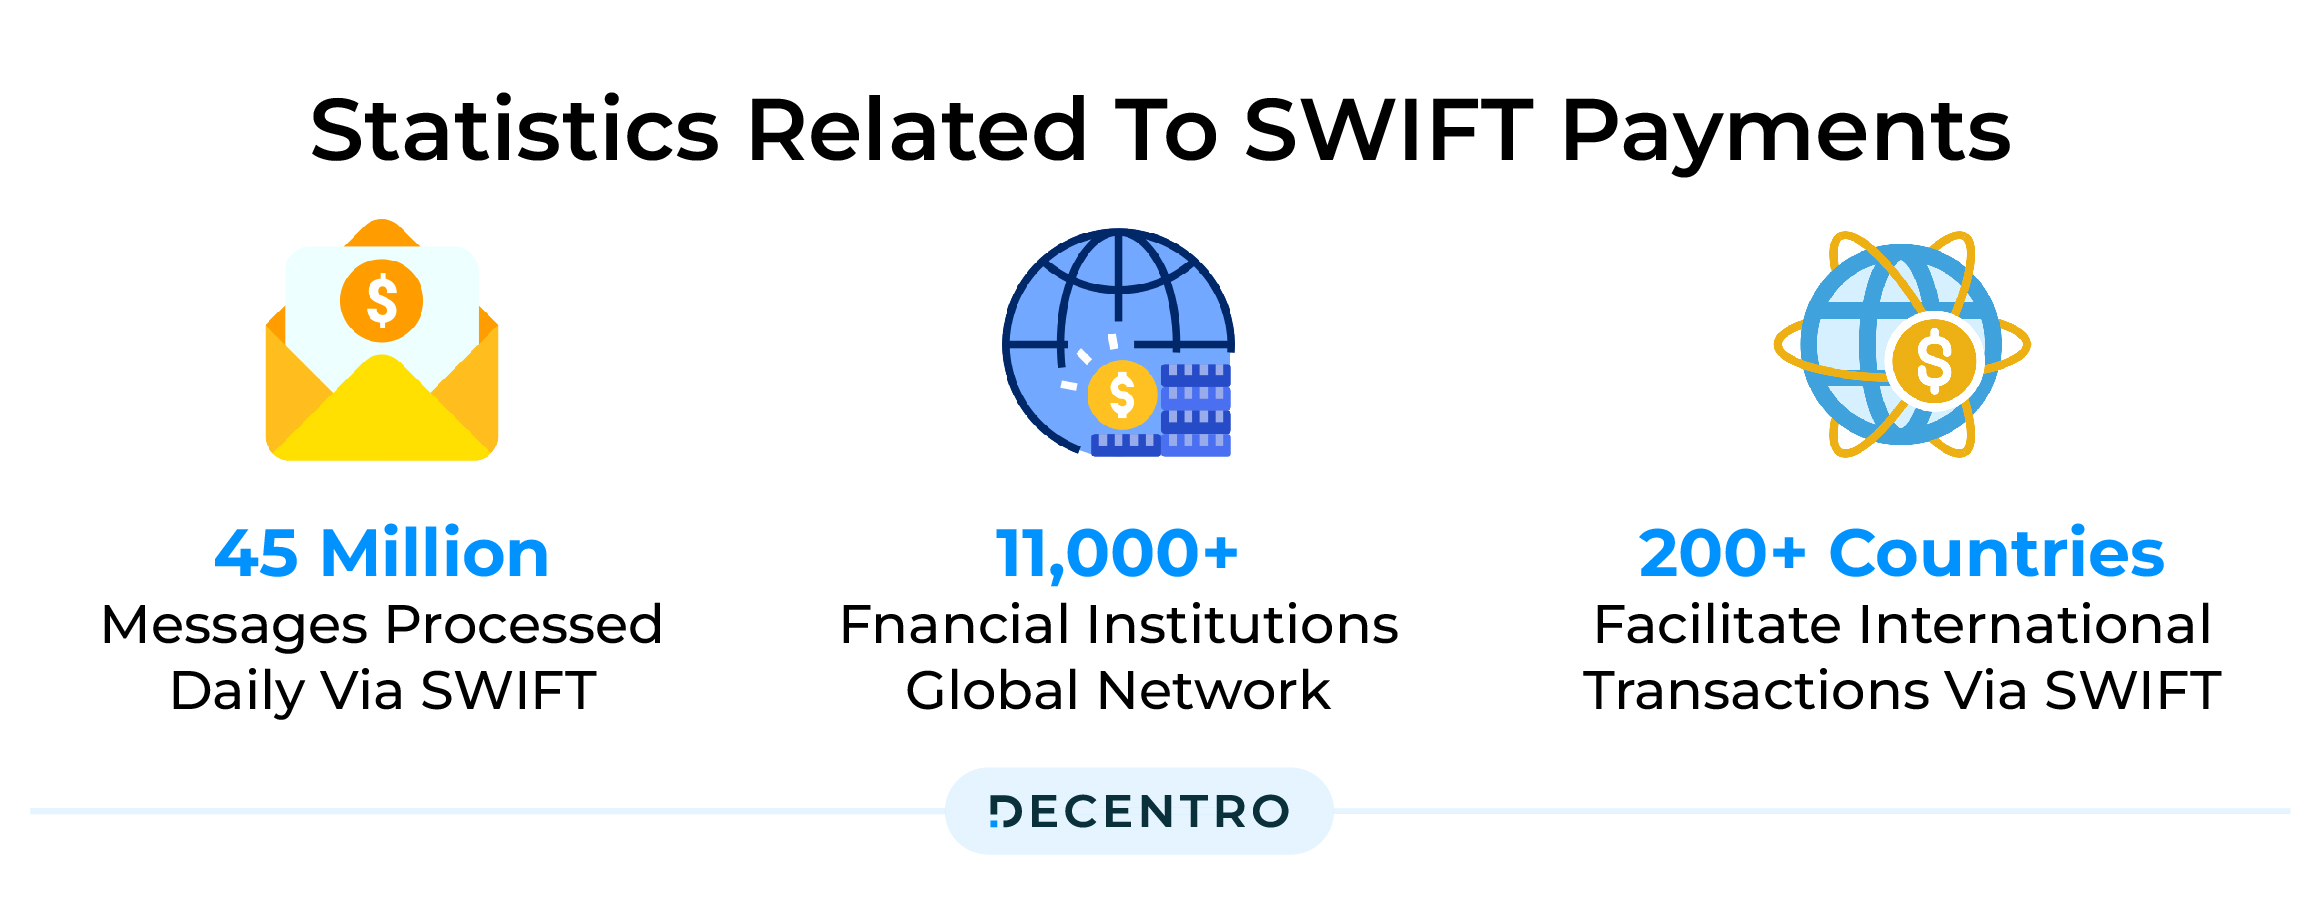 Statistics related to SWIFT payments 